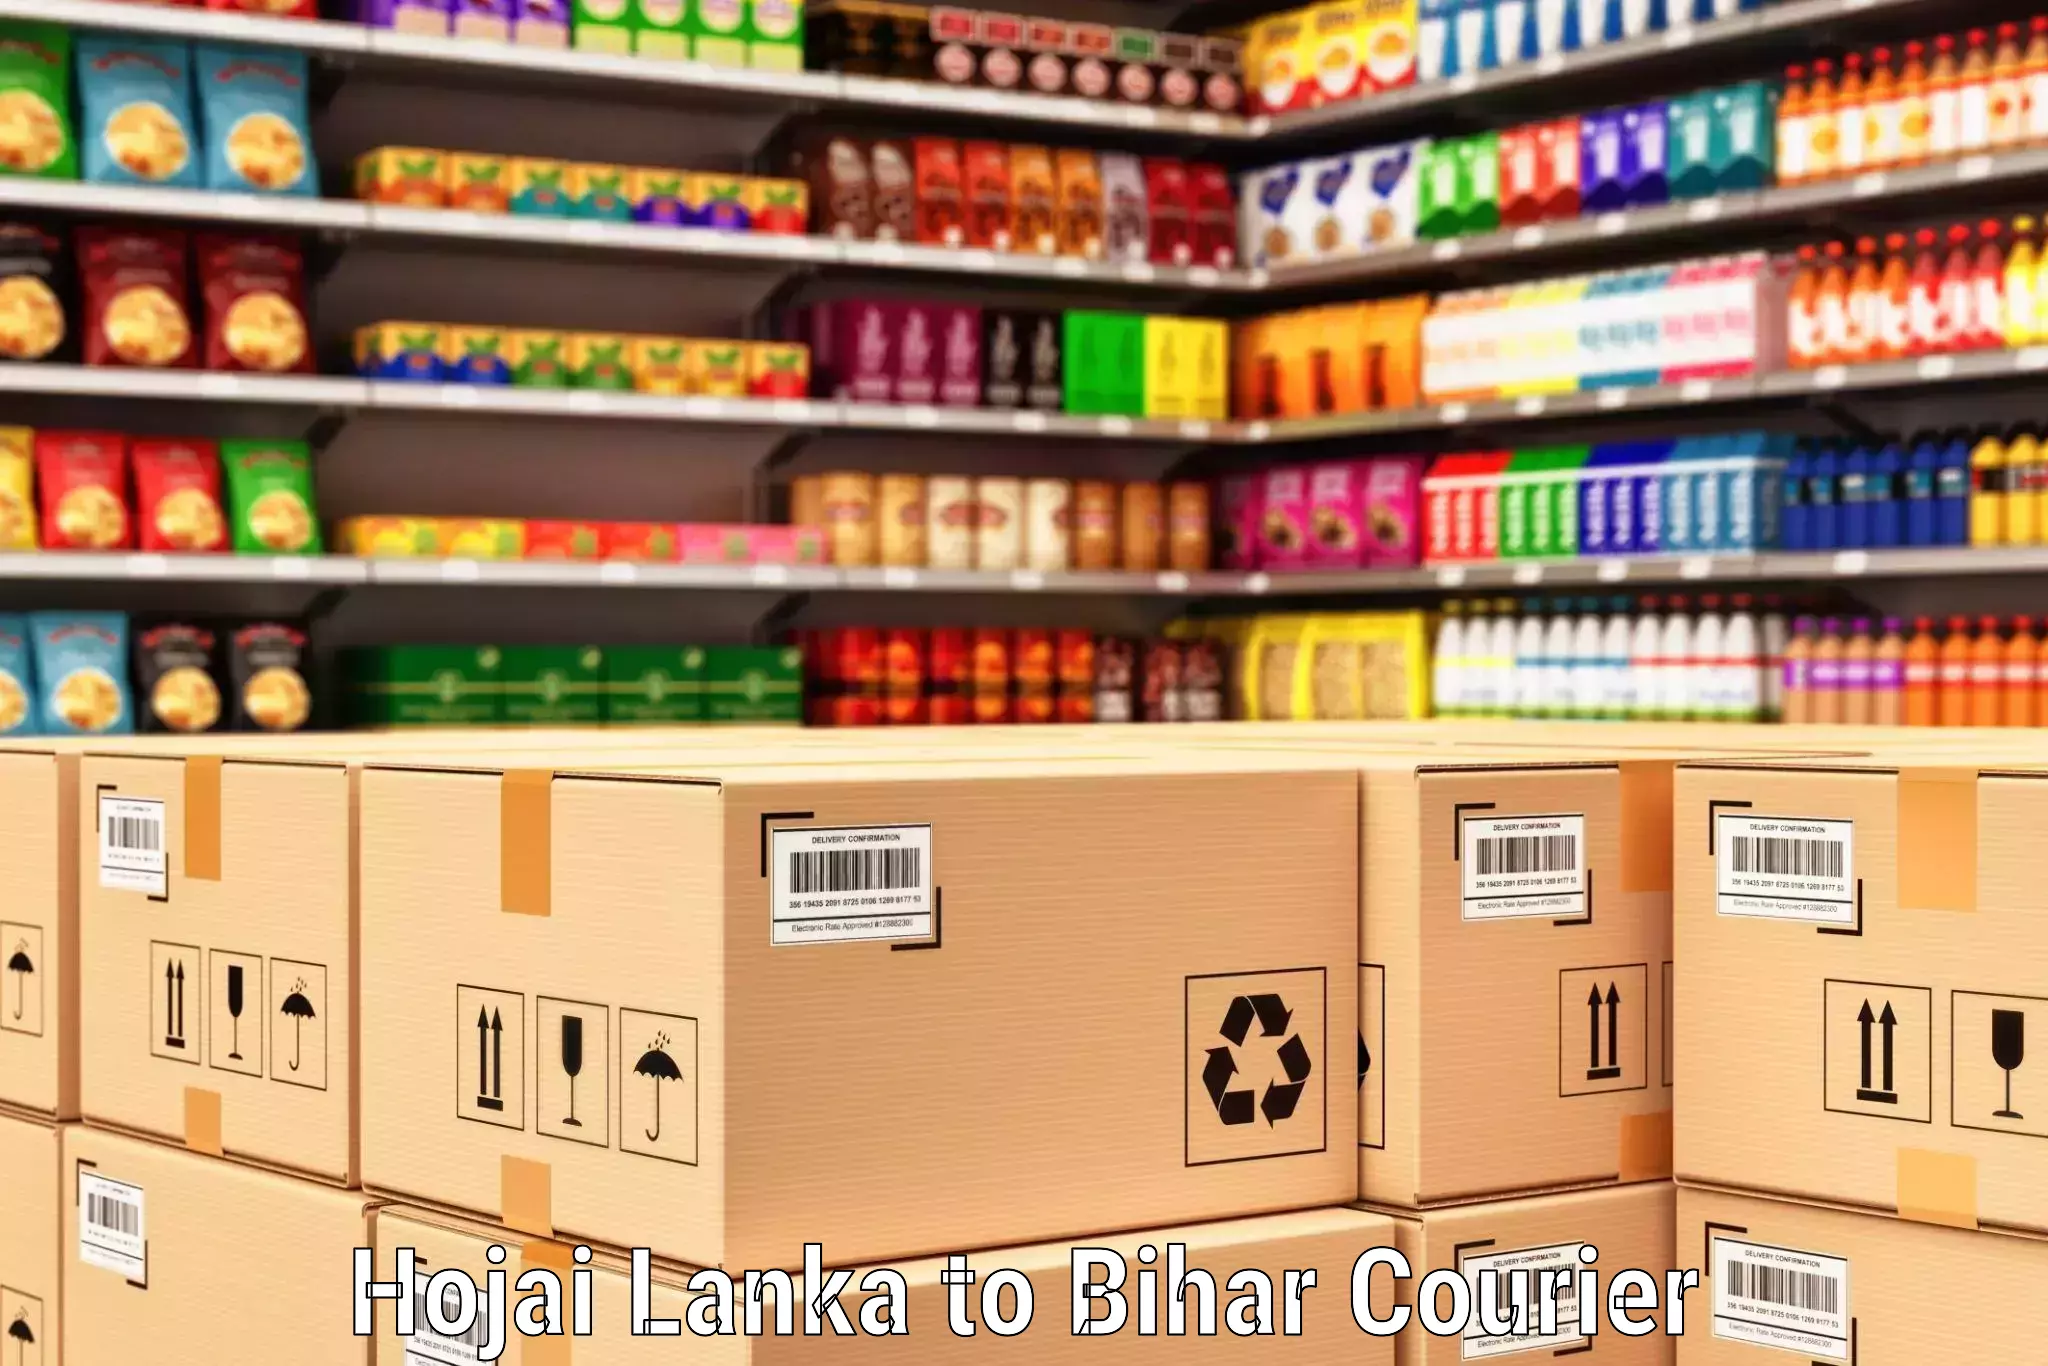 Secure package delivery Hojai Lanka to Banka